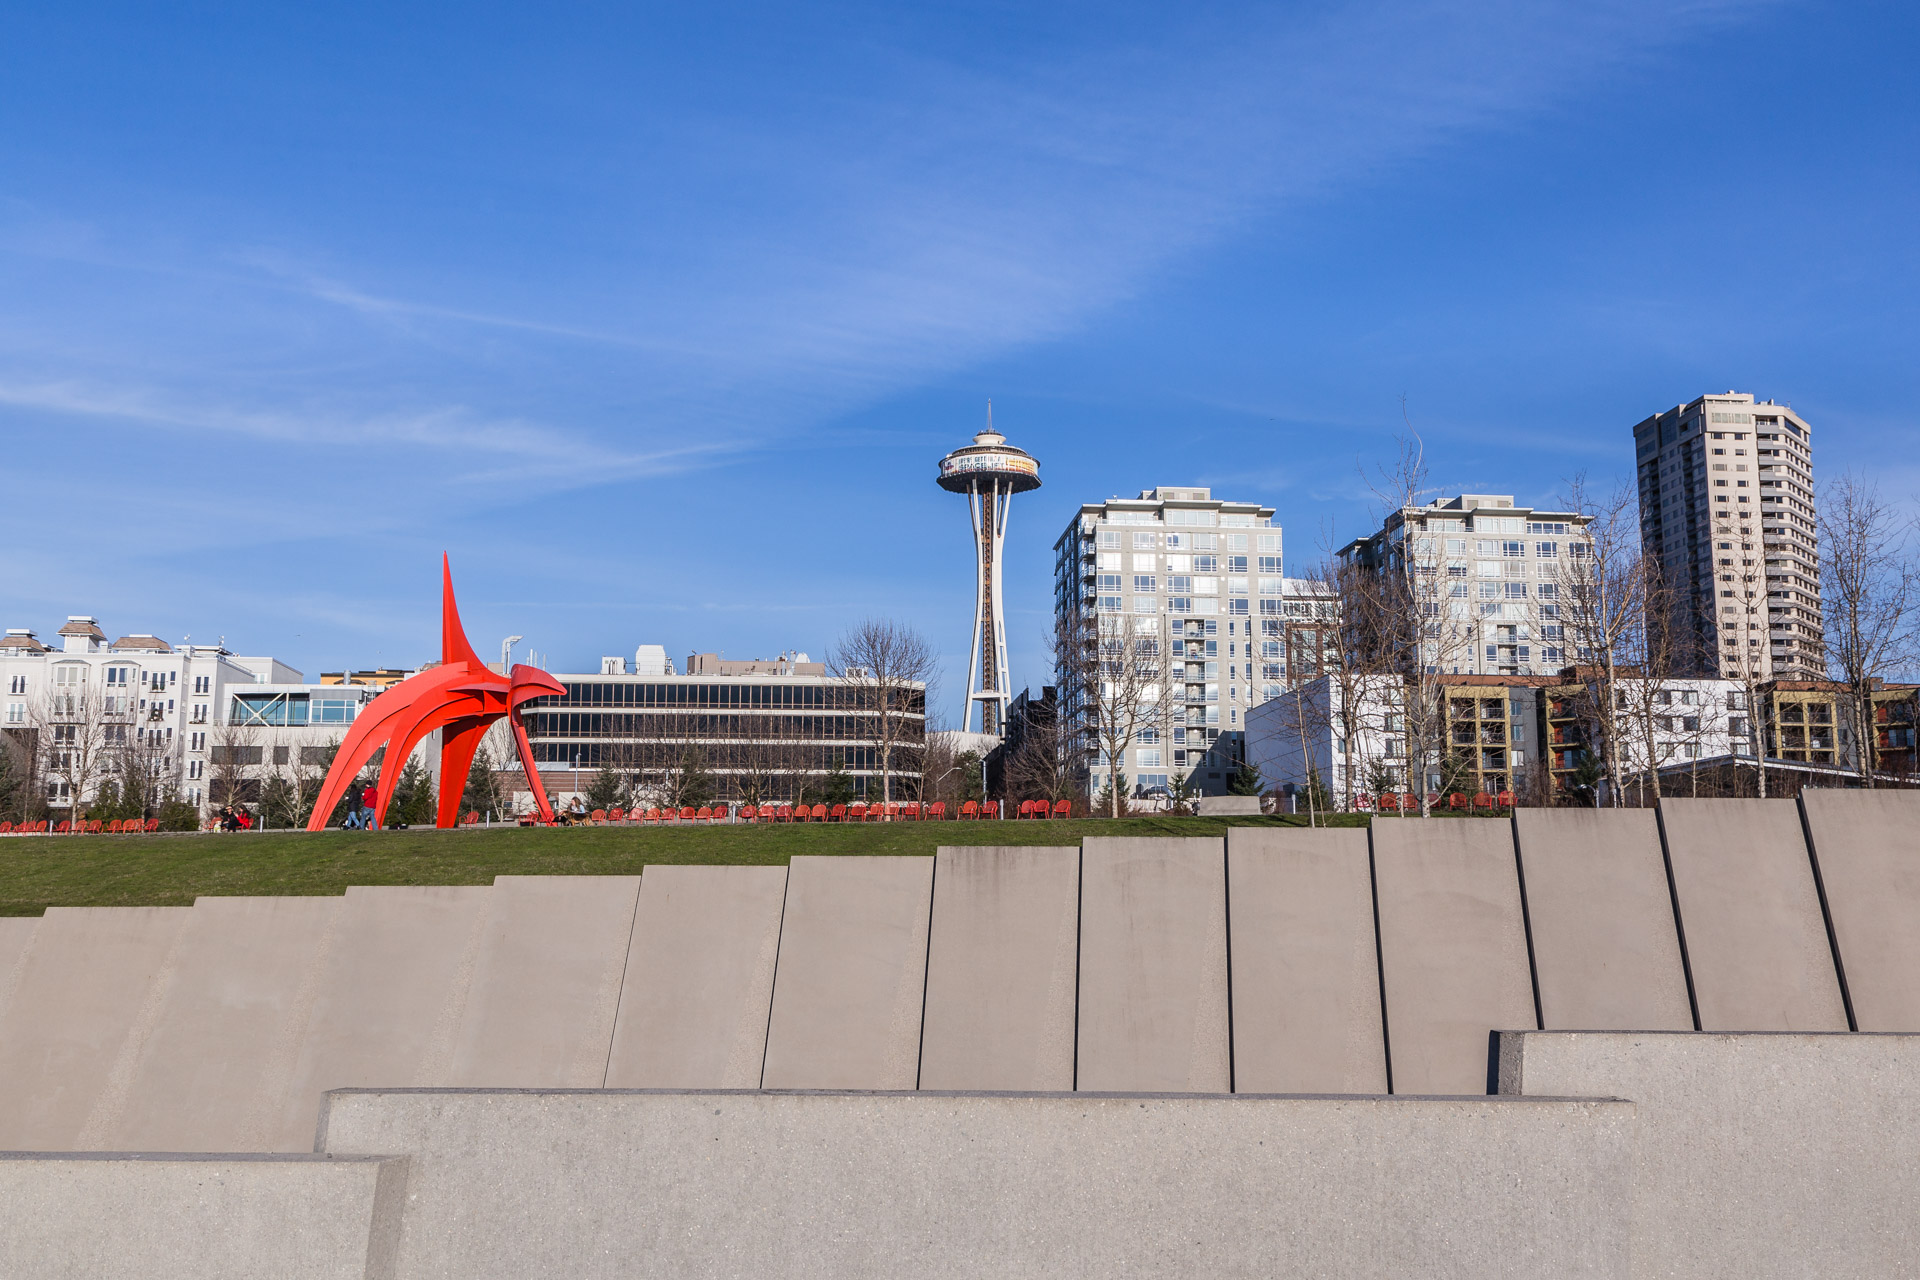 Blue Skies At Olympic Sculpture Park